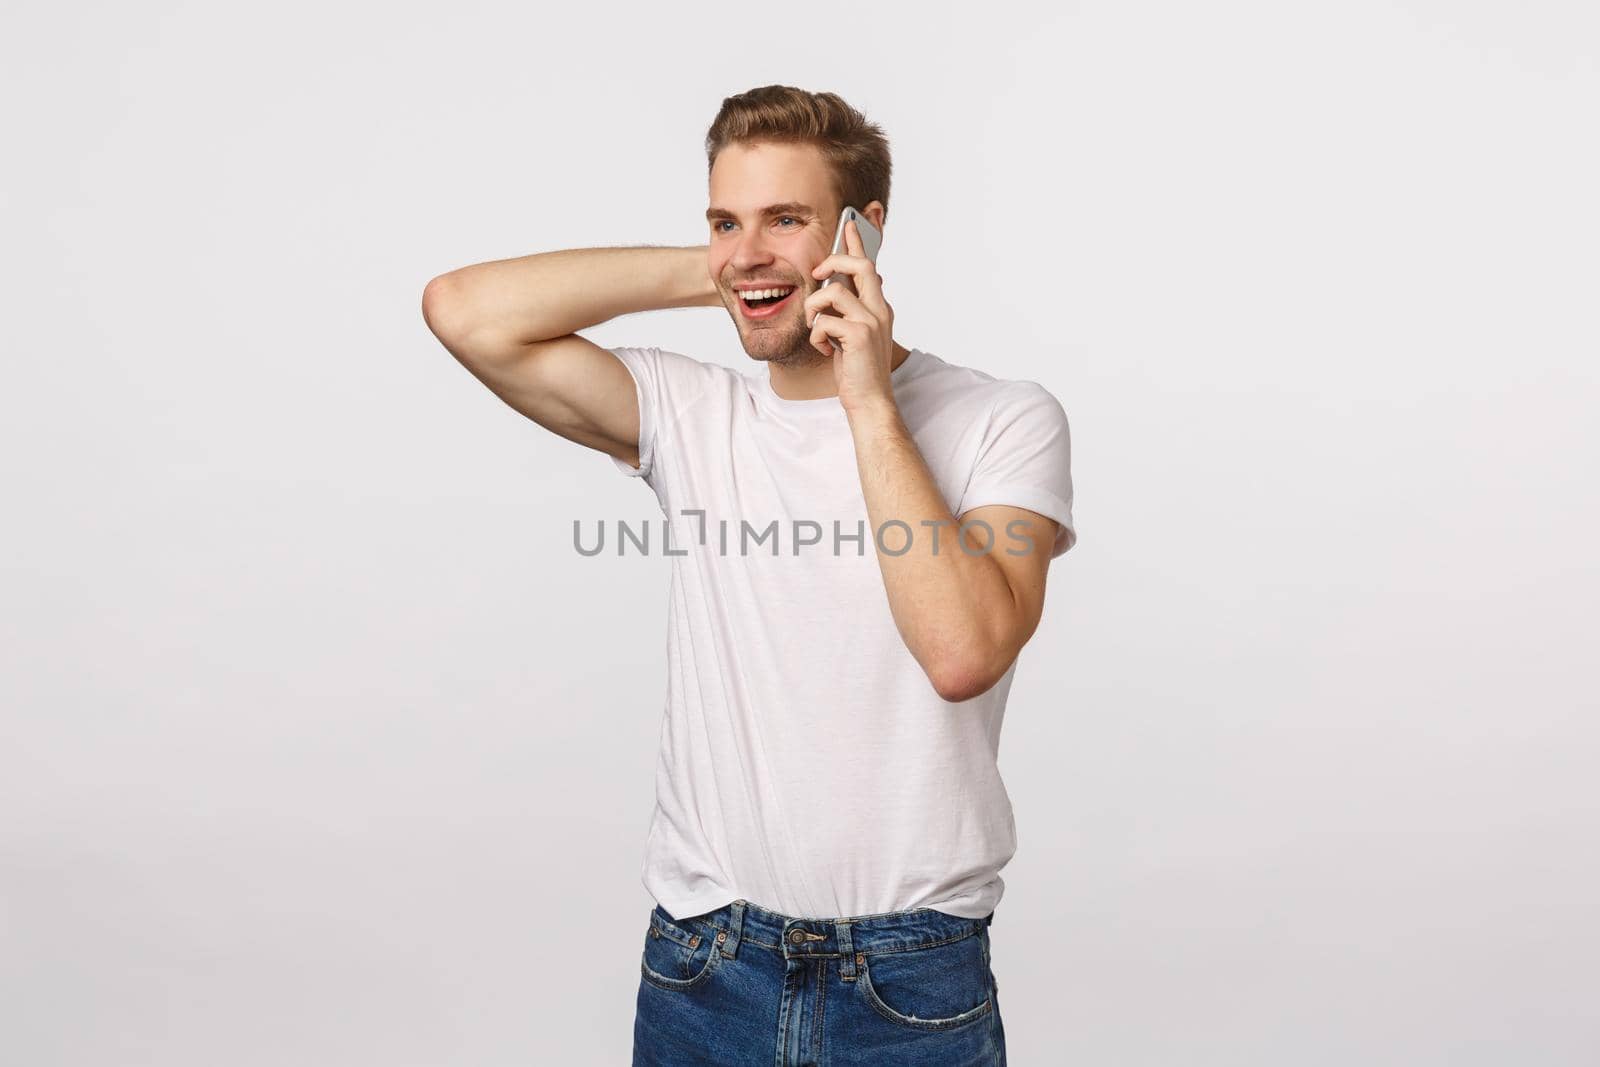 Happy flattered and pleased handsome blond guy receive praises or good news via phone call, holding smartphone near ear, touching neck silly and embarassed, standing white background.